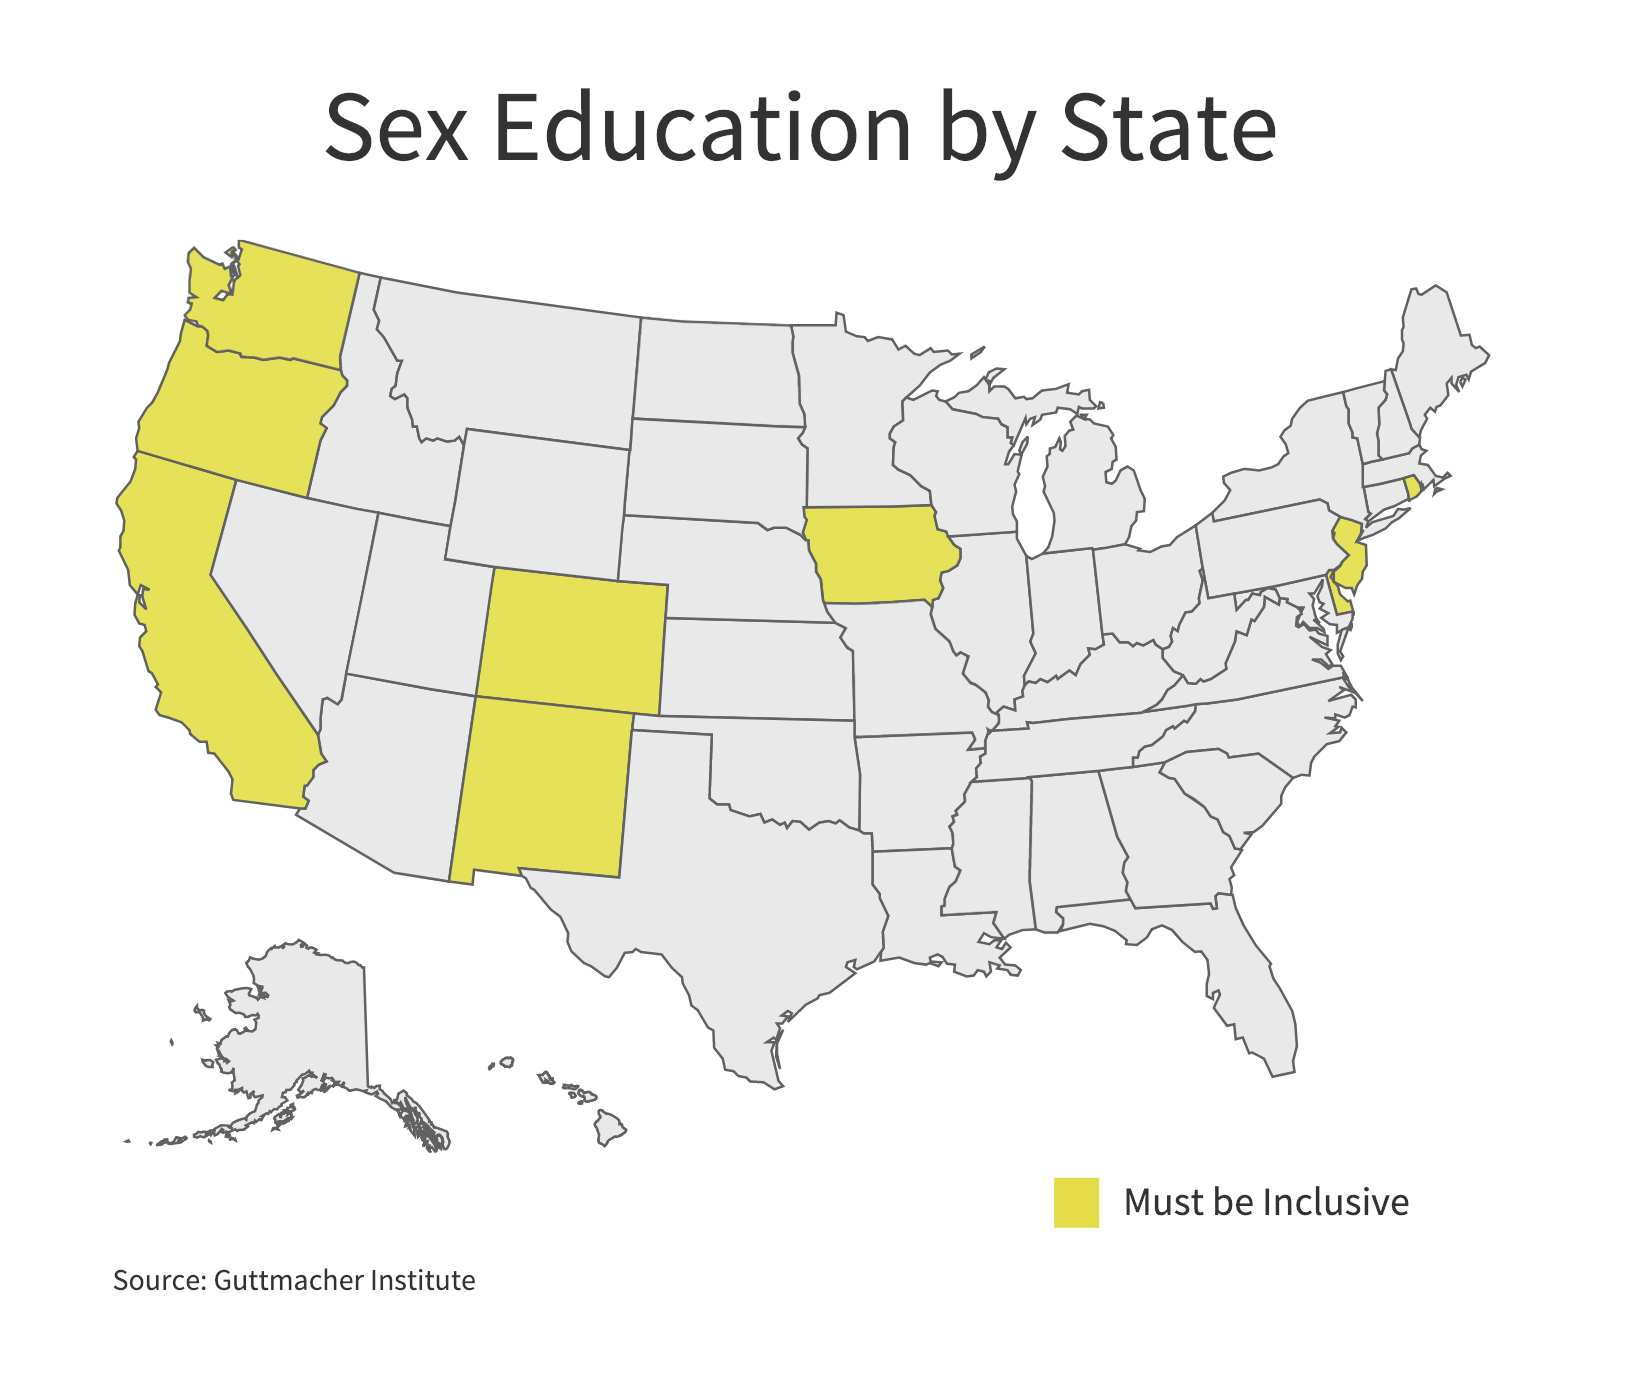 Nine states require that when sexual education is provided it be inclusive of sexual orientations. (Charts by Ester Wells/MNS)